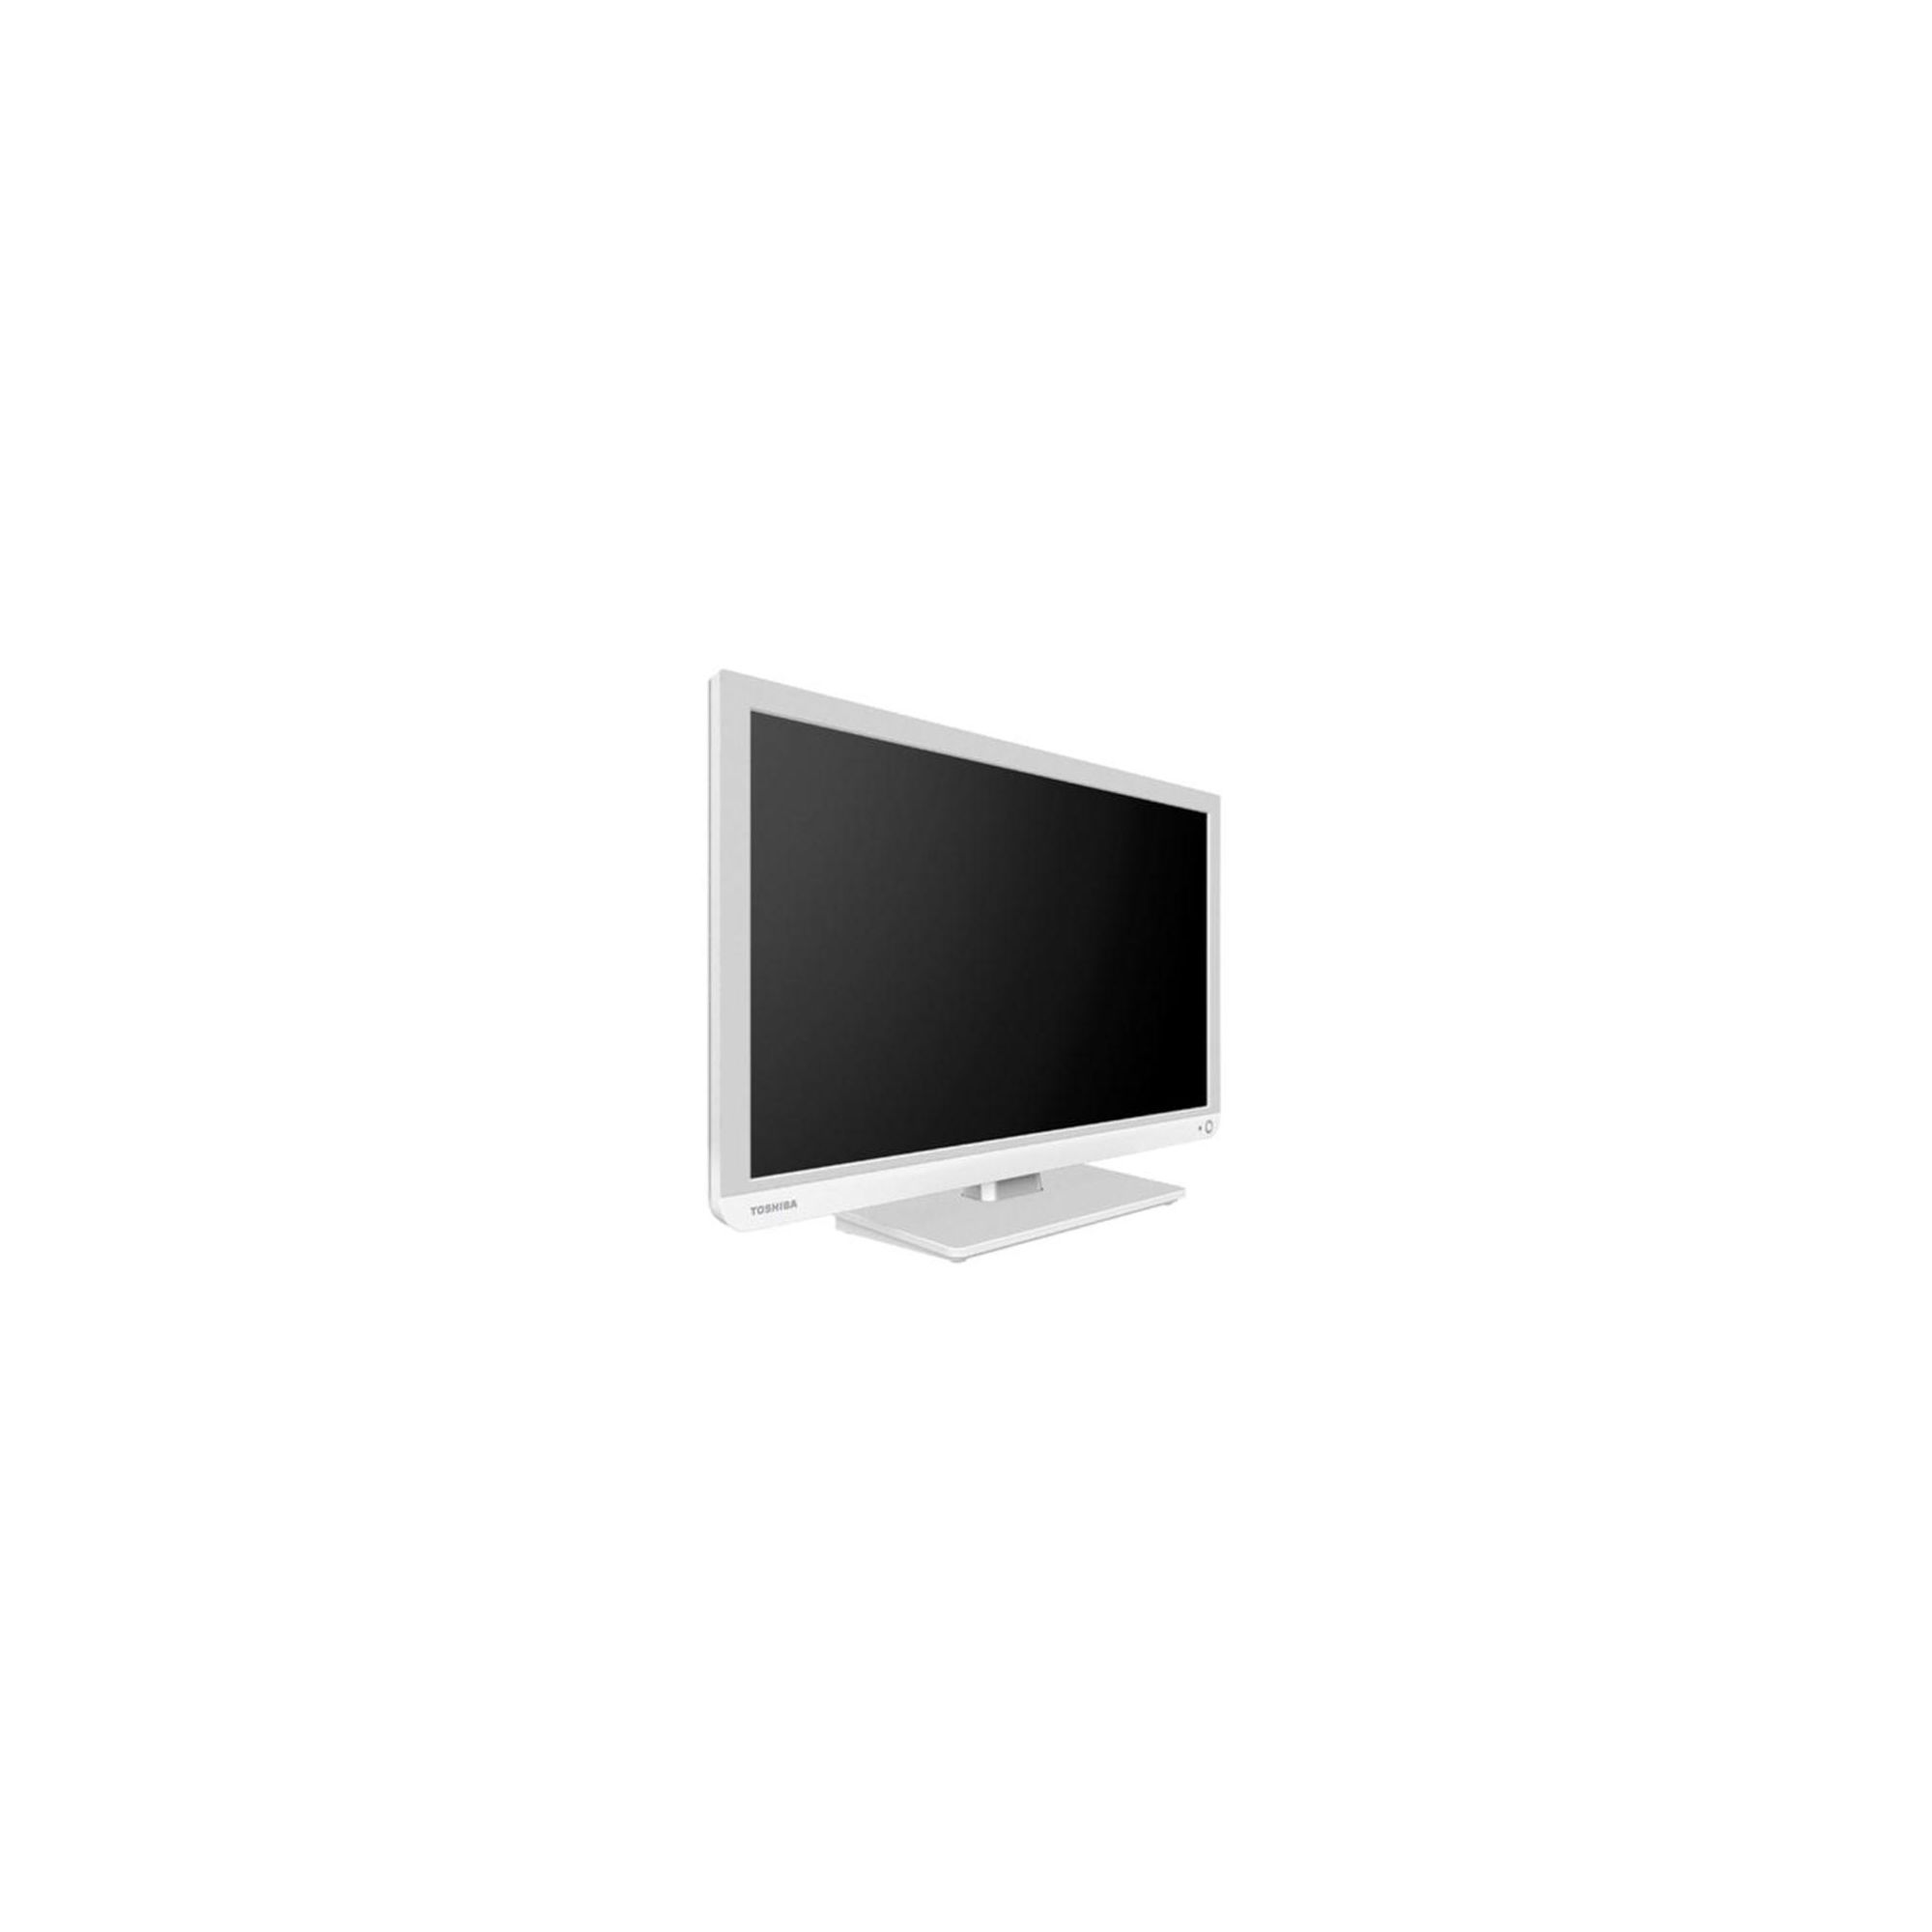 TOSHIBA 22 INCH LED HD READY TV WITH BUILT IN DVD PLAYER 1XHDMI PC INPUT – WHITE